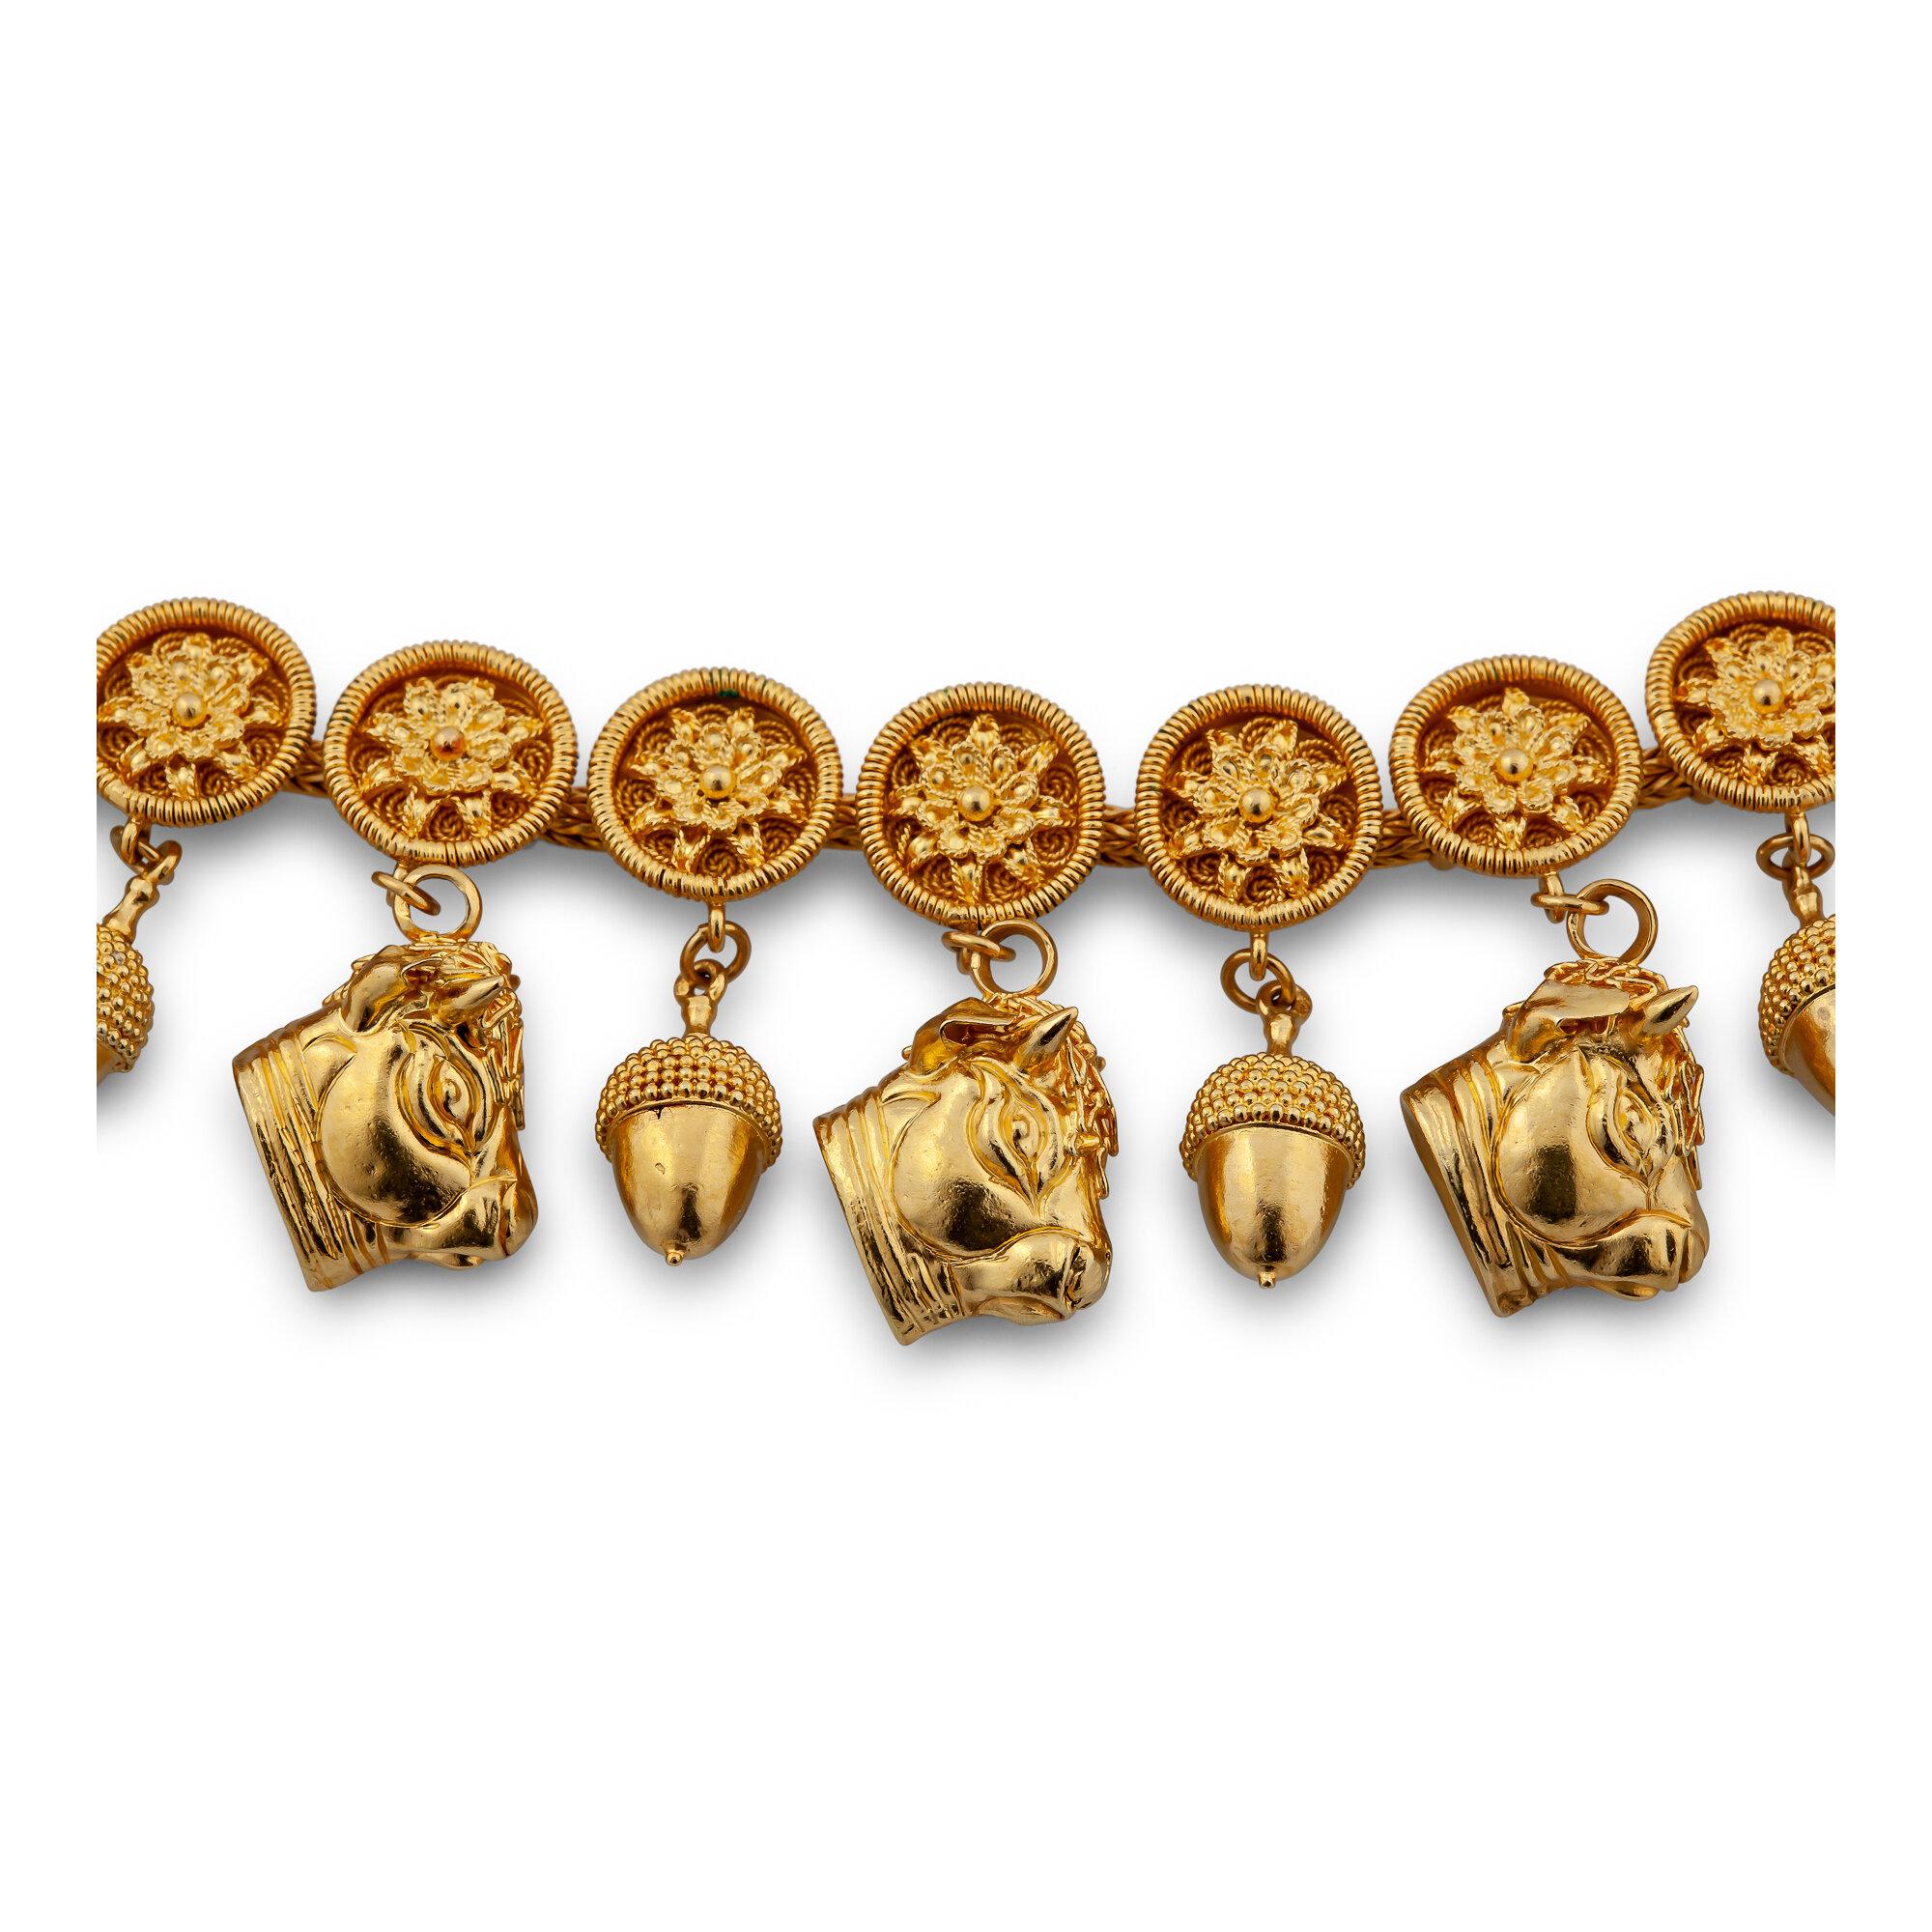 The strong bull and the mighty acorn symbolize eternal power, and this 22 karat yellow gold Zolotas necklace has both in abundance.  With seven bulls and fourteen acorns, each hanging from an intricately detailed floral disc, this 15 1/2 in length